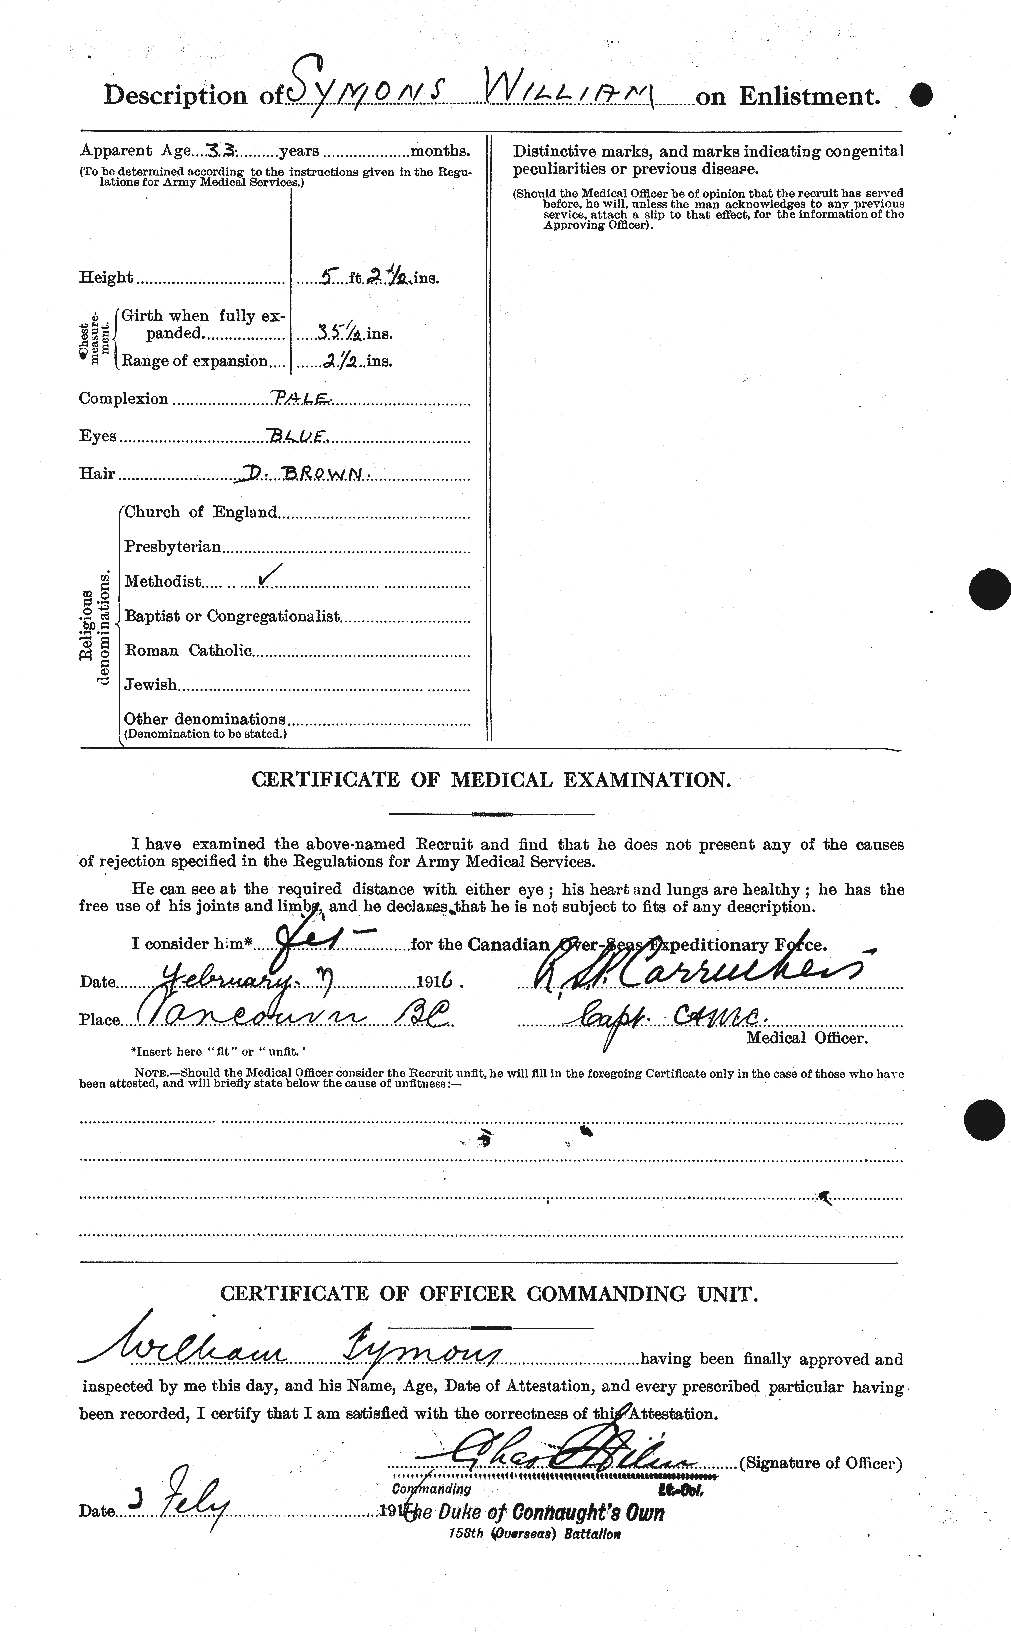 Personnel Records of the First World War - CEF 129016b